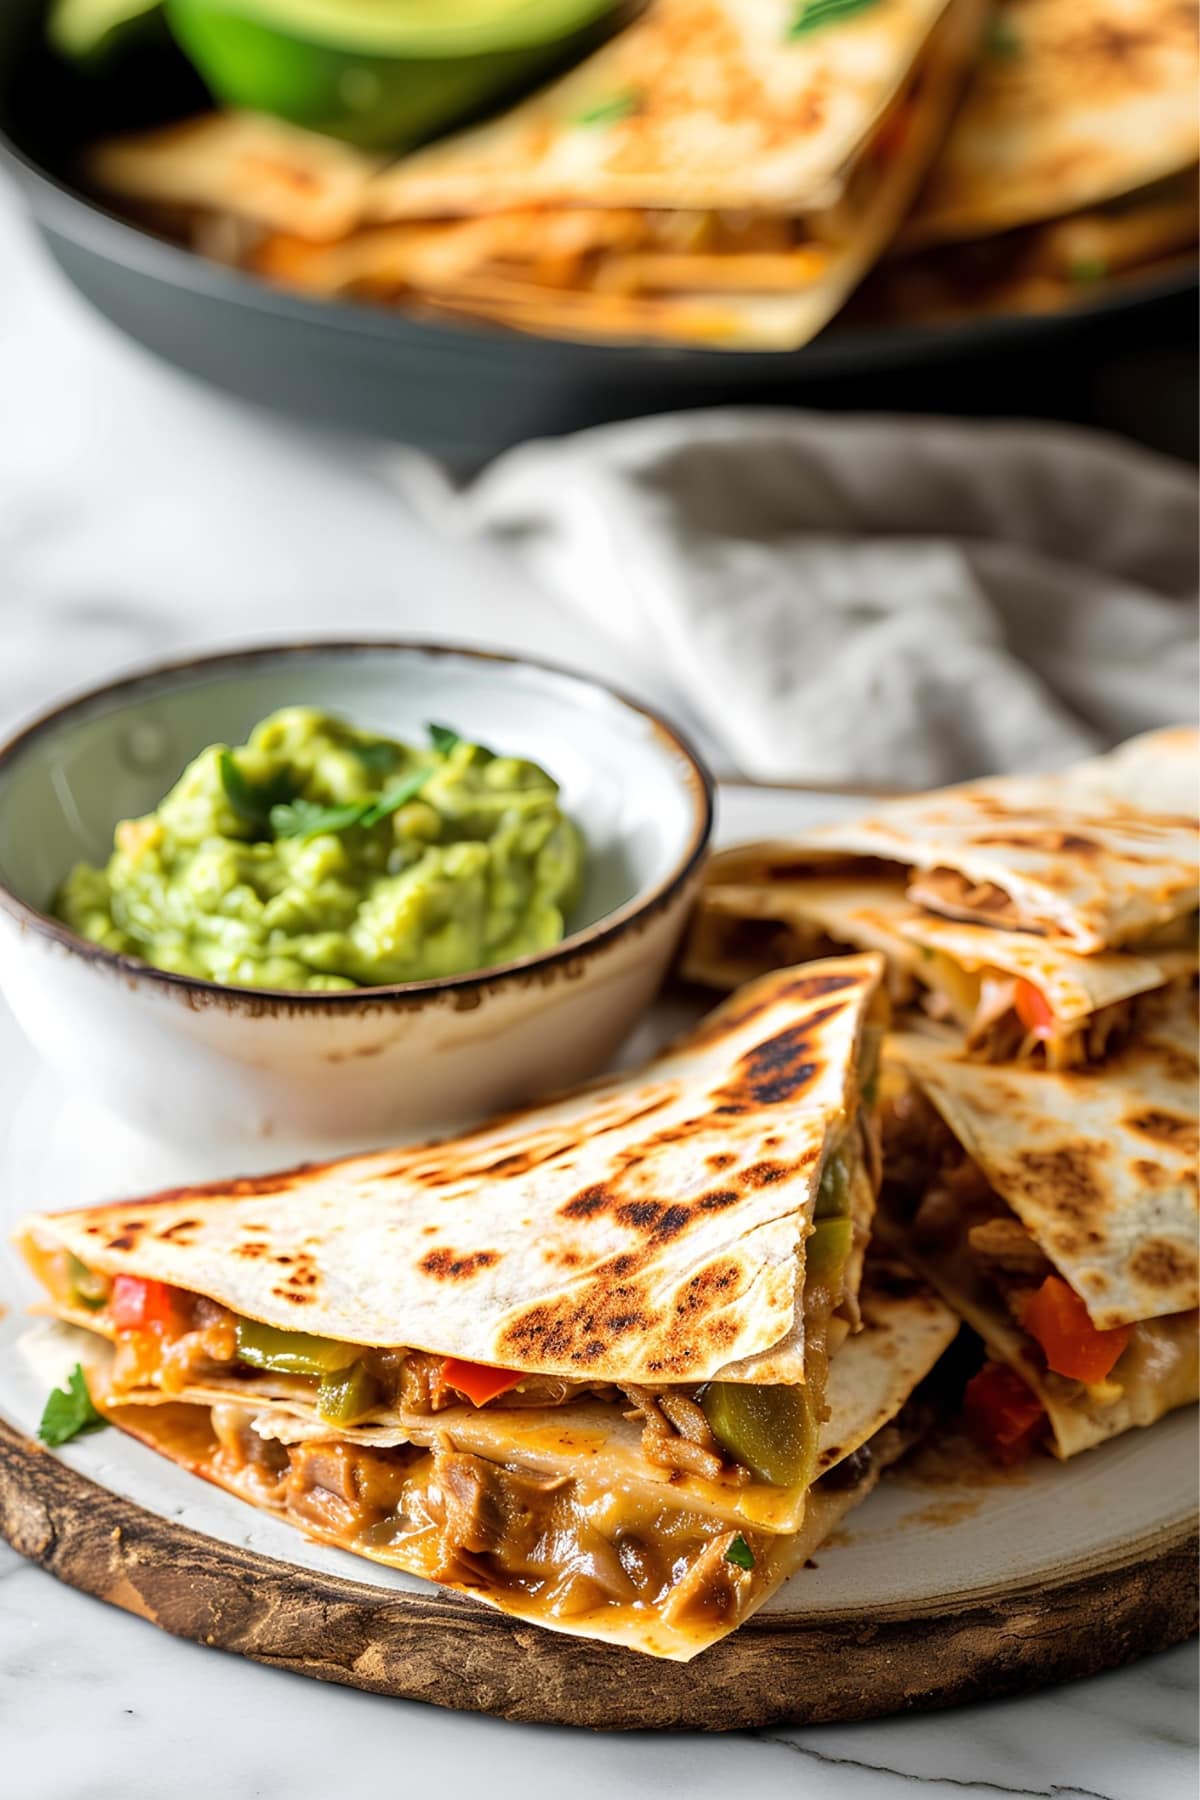 Homemade quesadillas filled with meat and vegetables served with guacamole